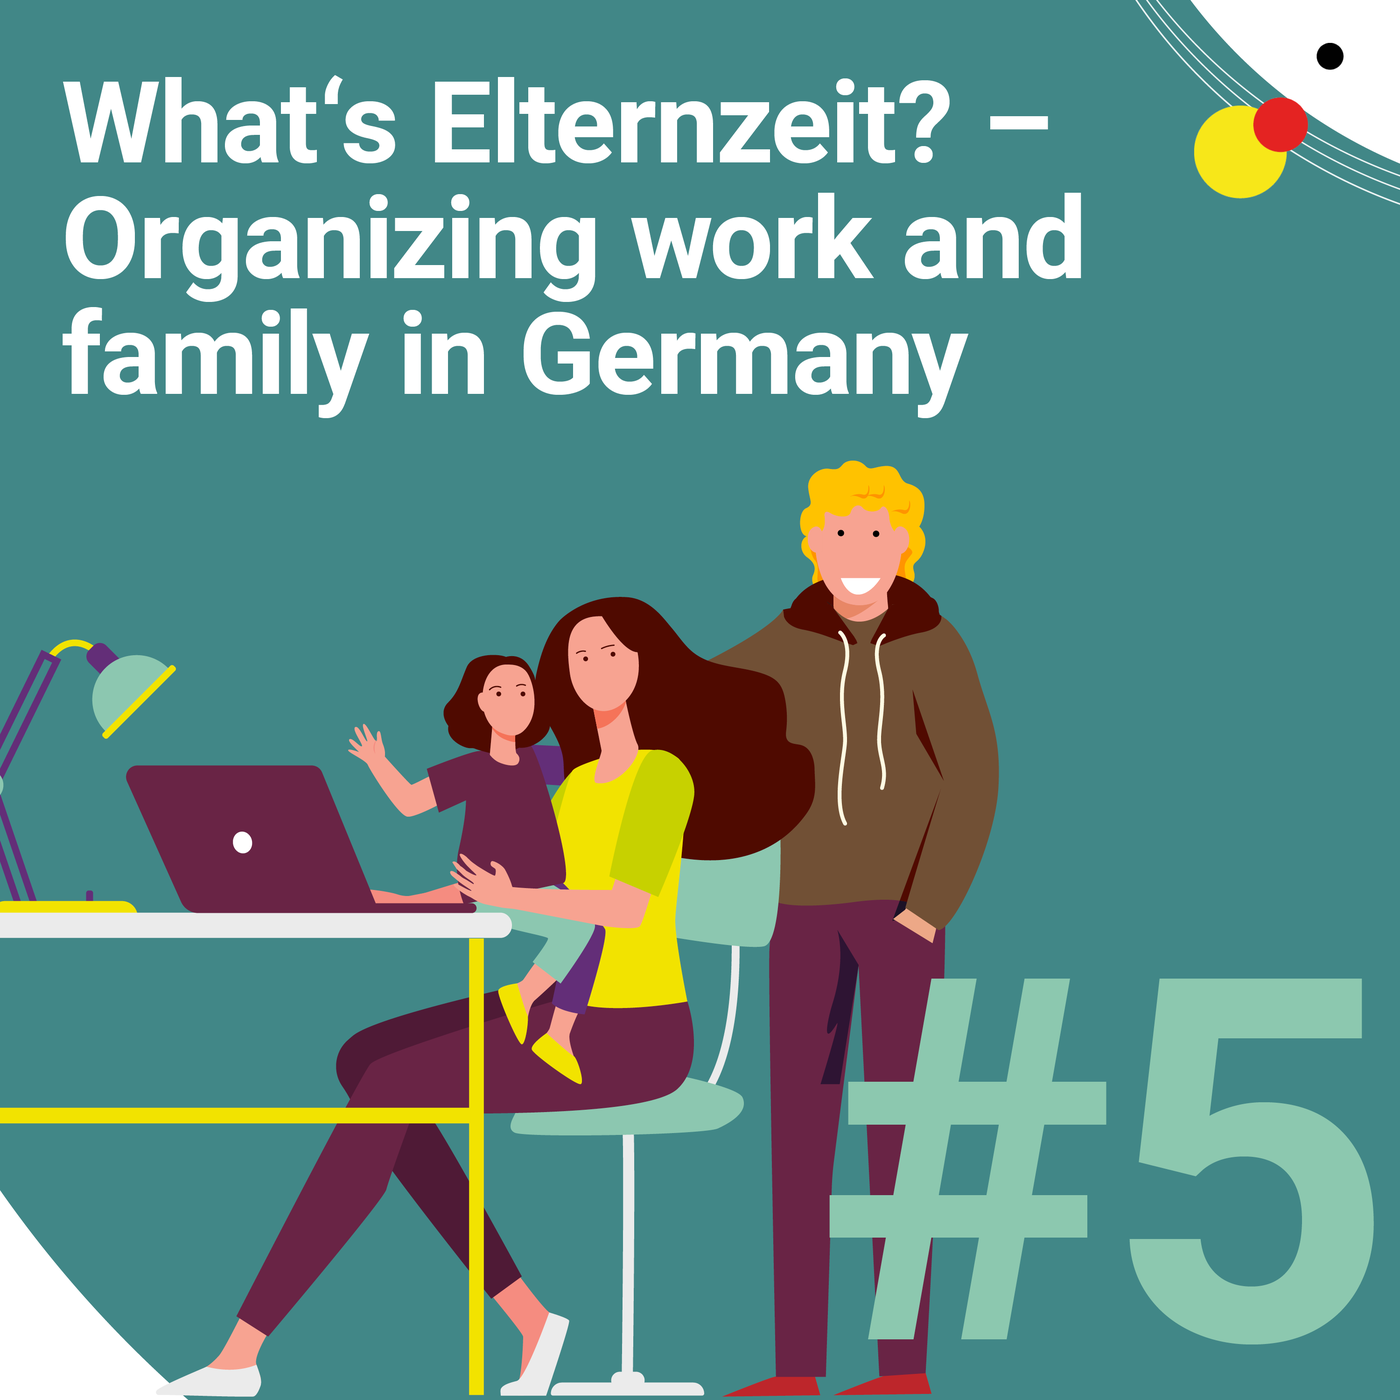 #5 What's Elternzeit? - Organizing work and family in Germany